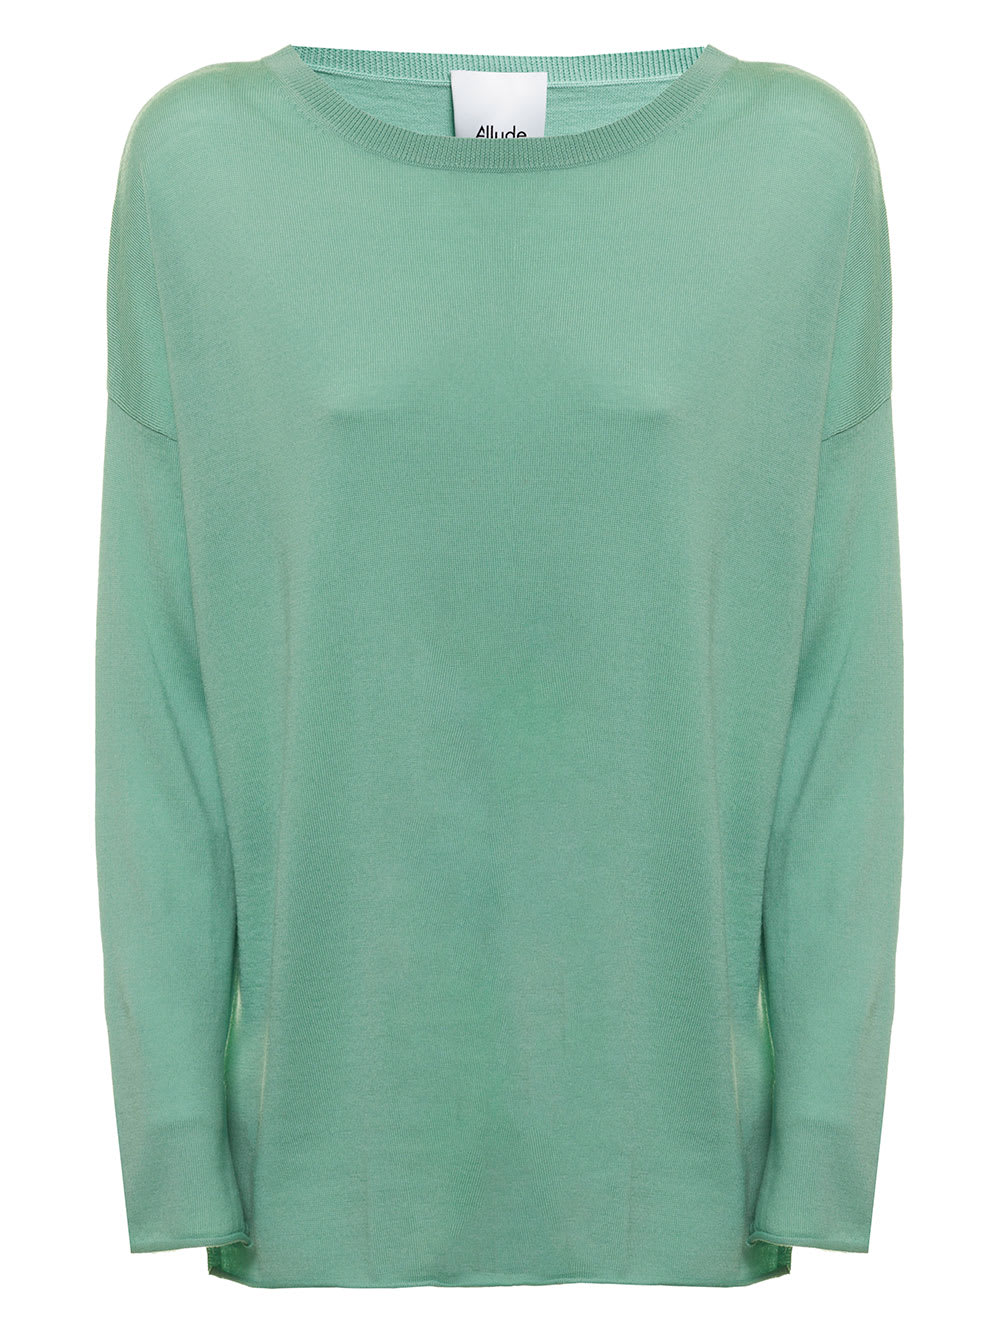 Allude Womans Green Wool Sweater